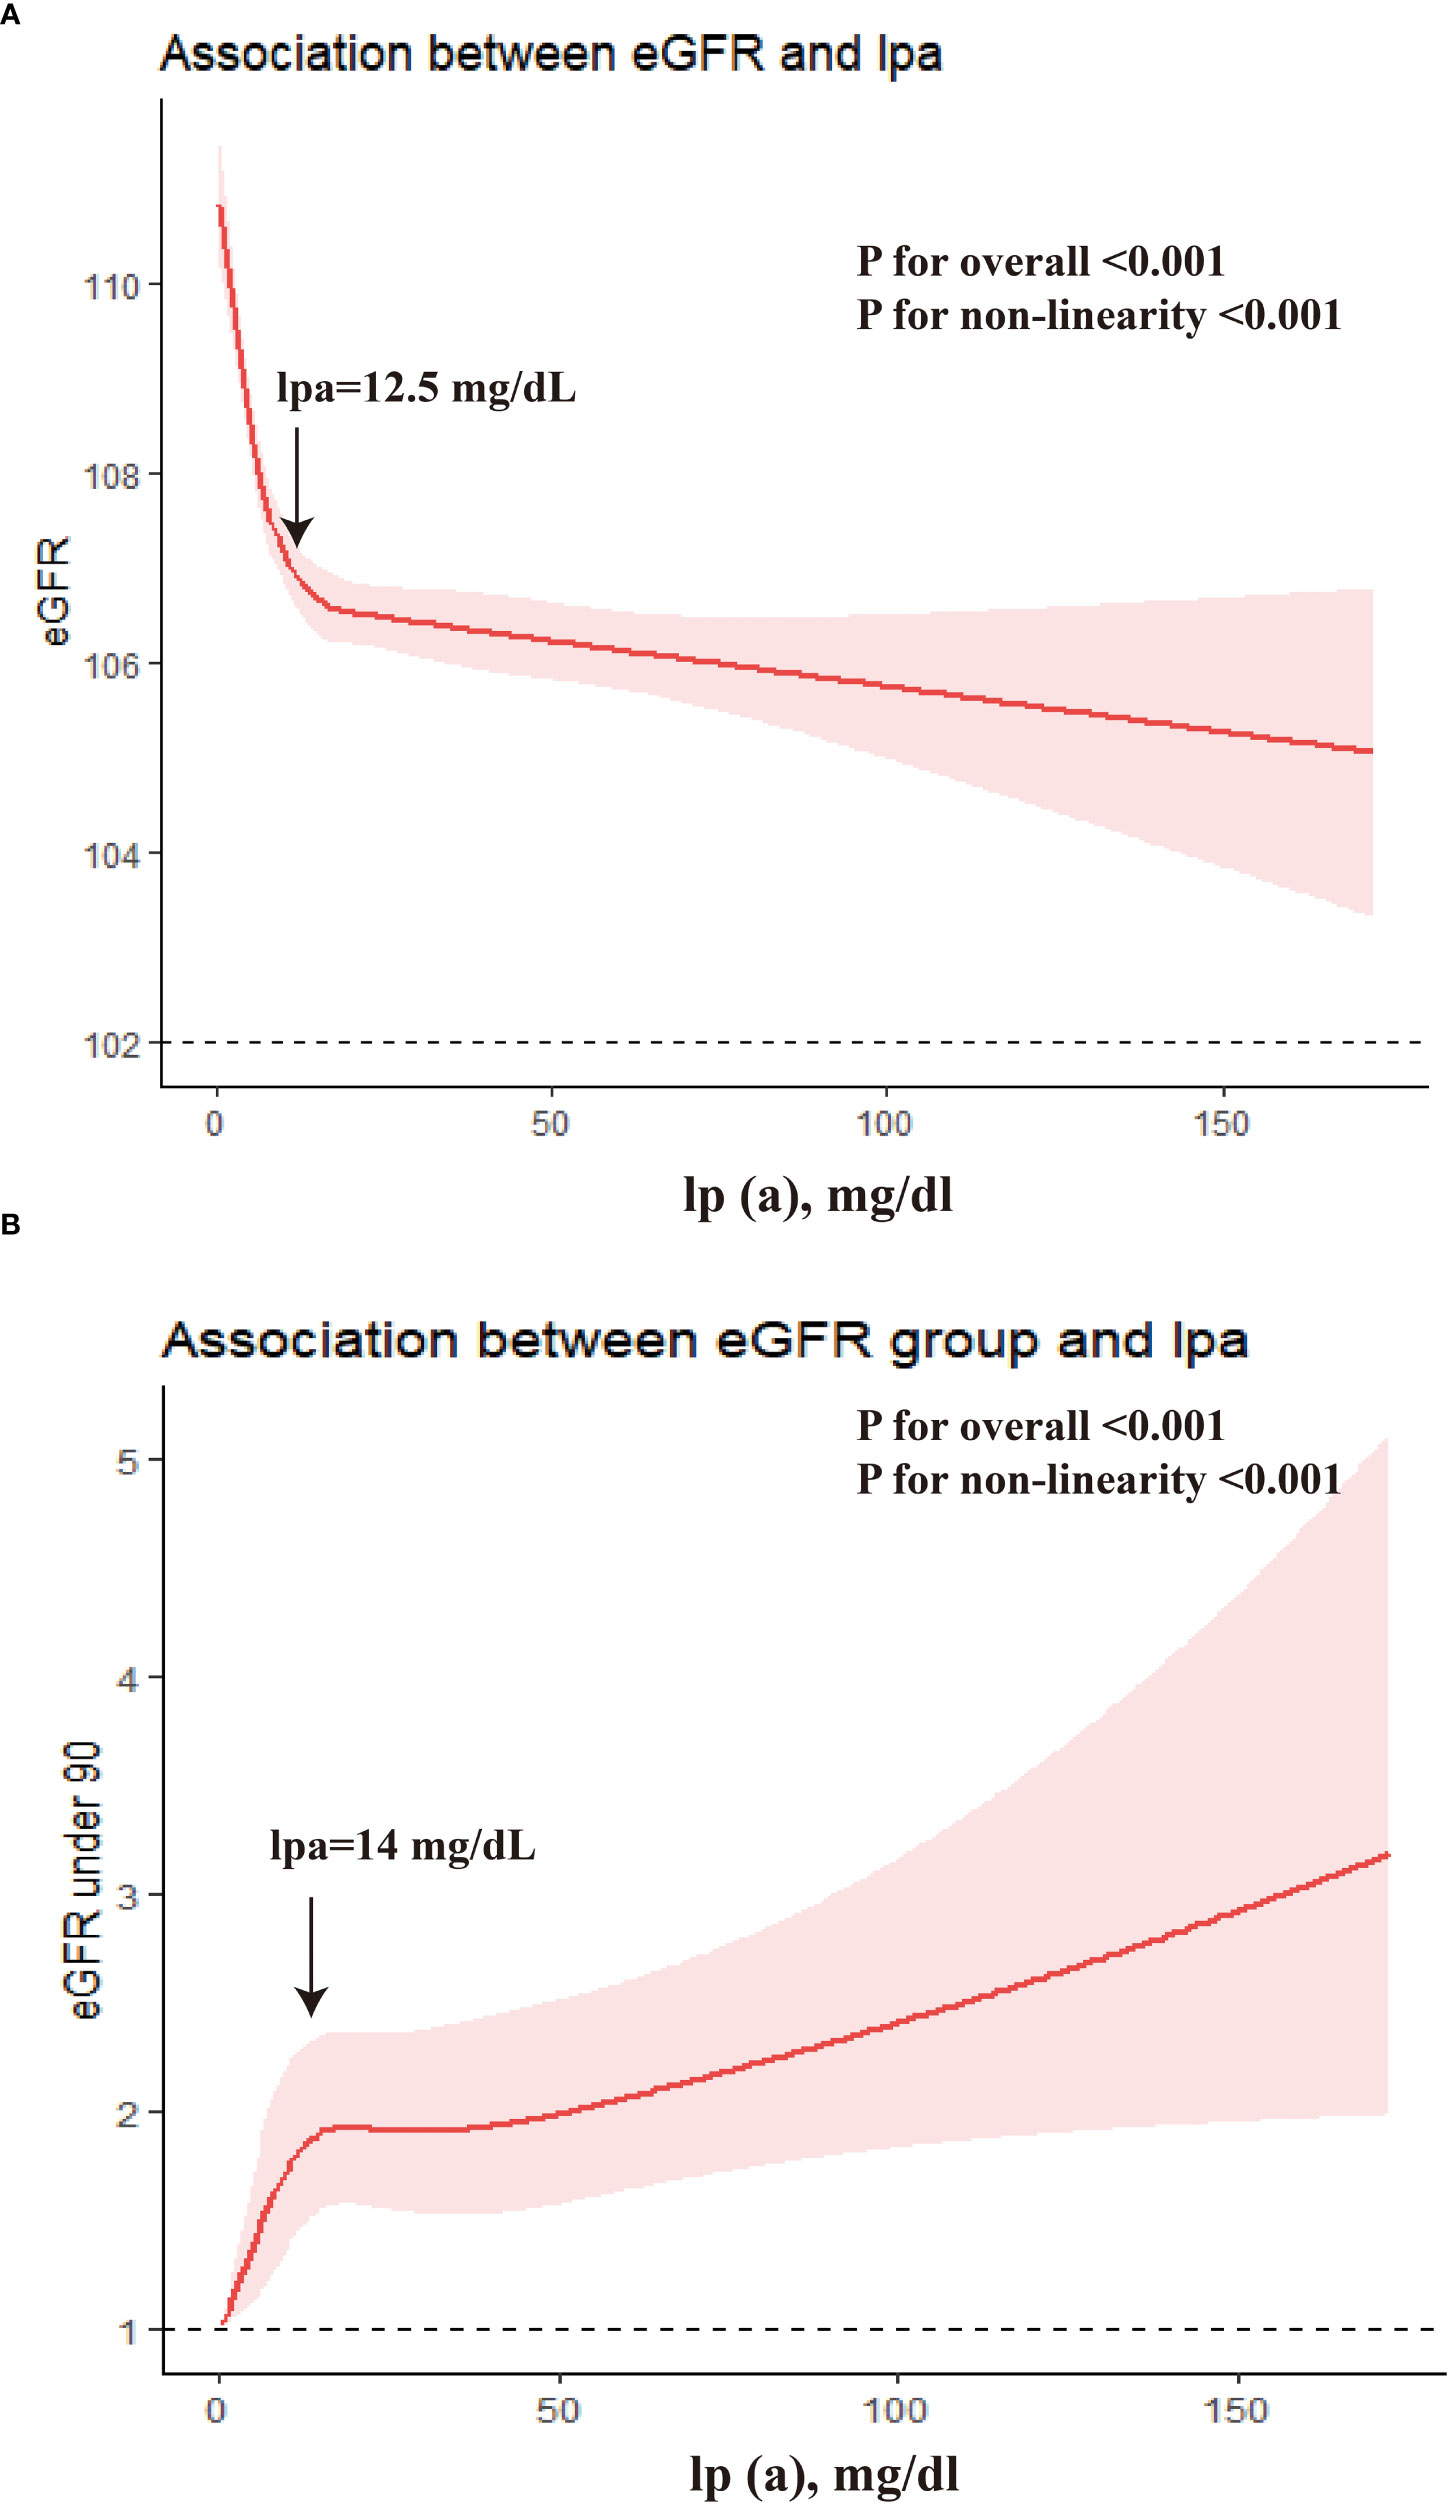 Frontiers  Association of Lipoprotein(a)-Associated Mortality and the  Estimated Glomerular Filtration Rate Level in Patients Undergoing Coronary  Angiography: A 51,500 Cohort Study